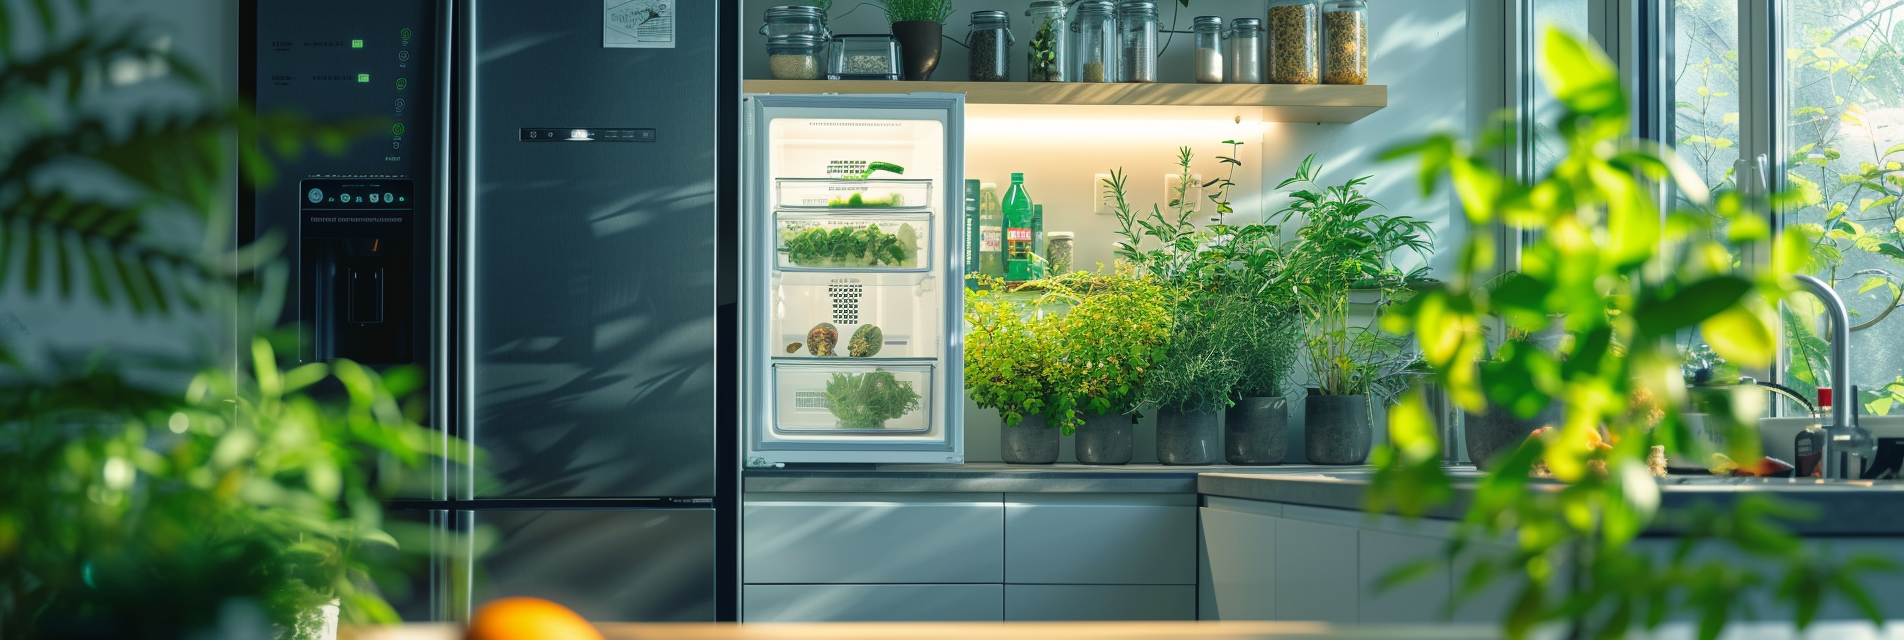 Cooling Marvels: A Comprehensive Guide to Refrigerators for Your Home and Garden